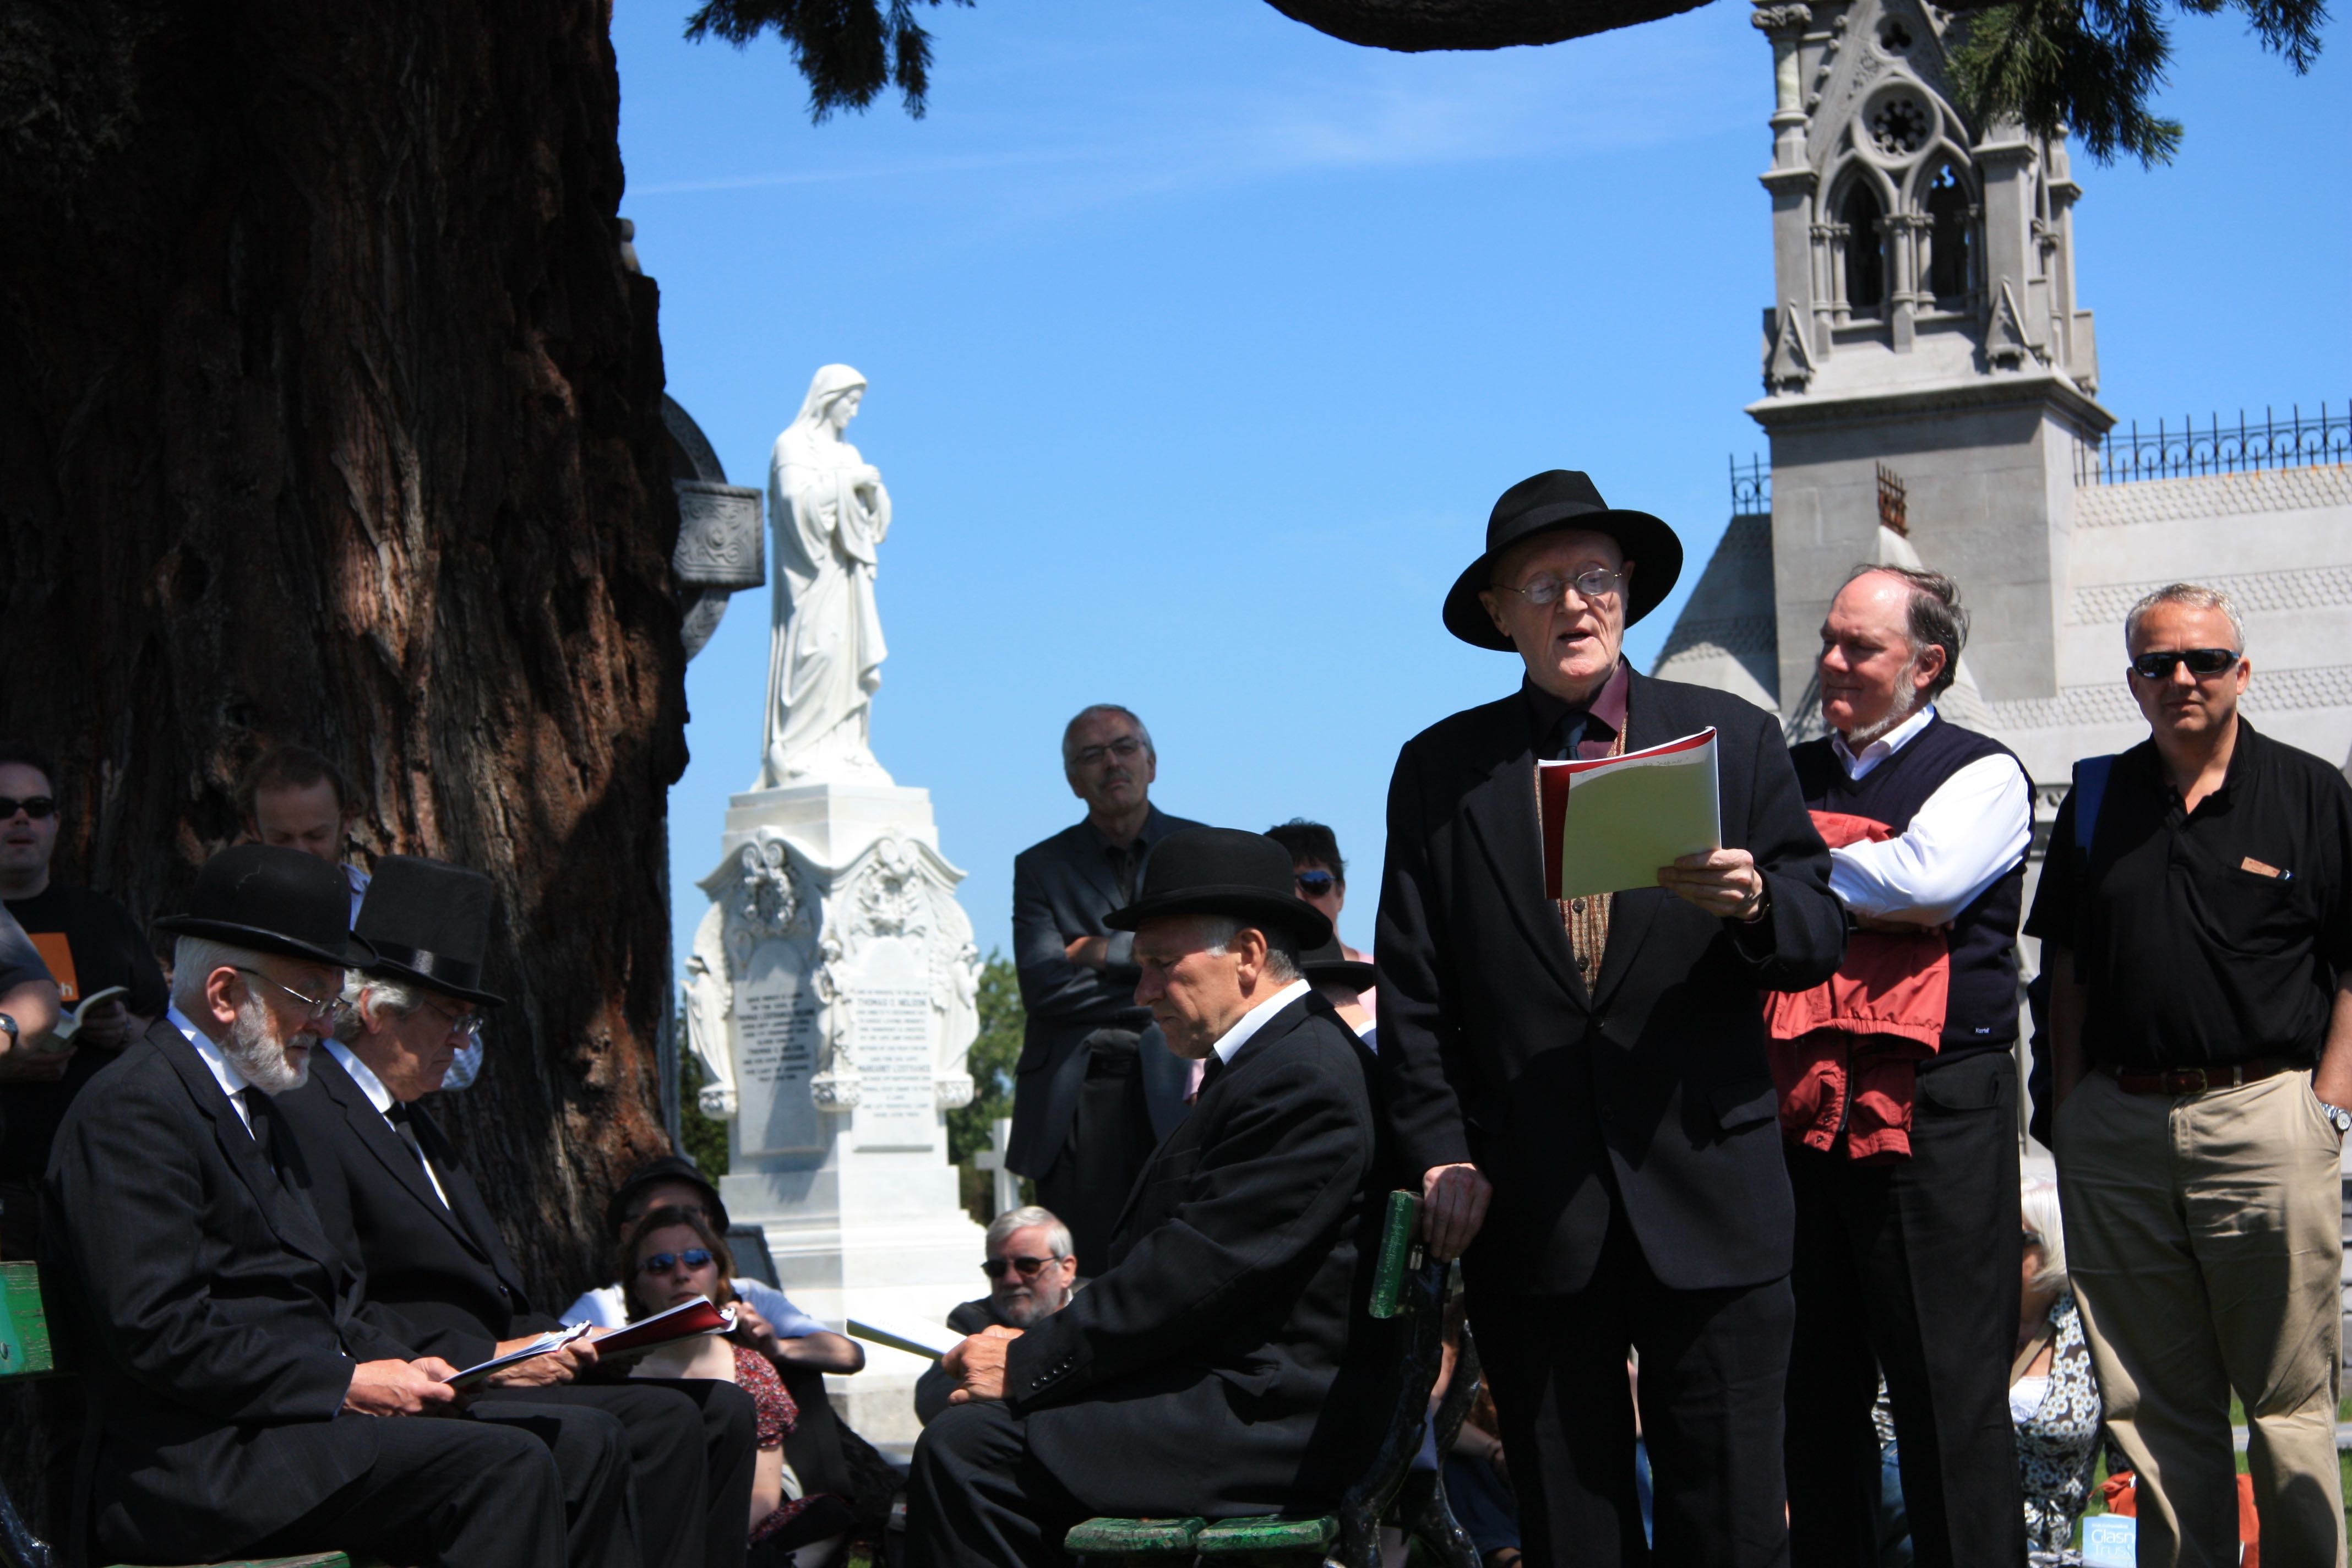 Reading Ulysses at  Glasnevin on the James Joyce Bloomsday tour.